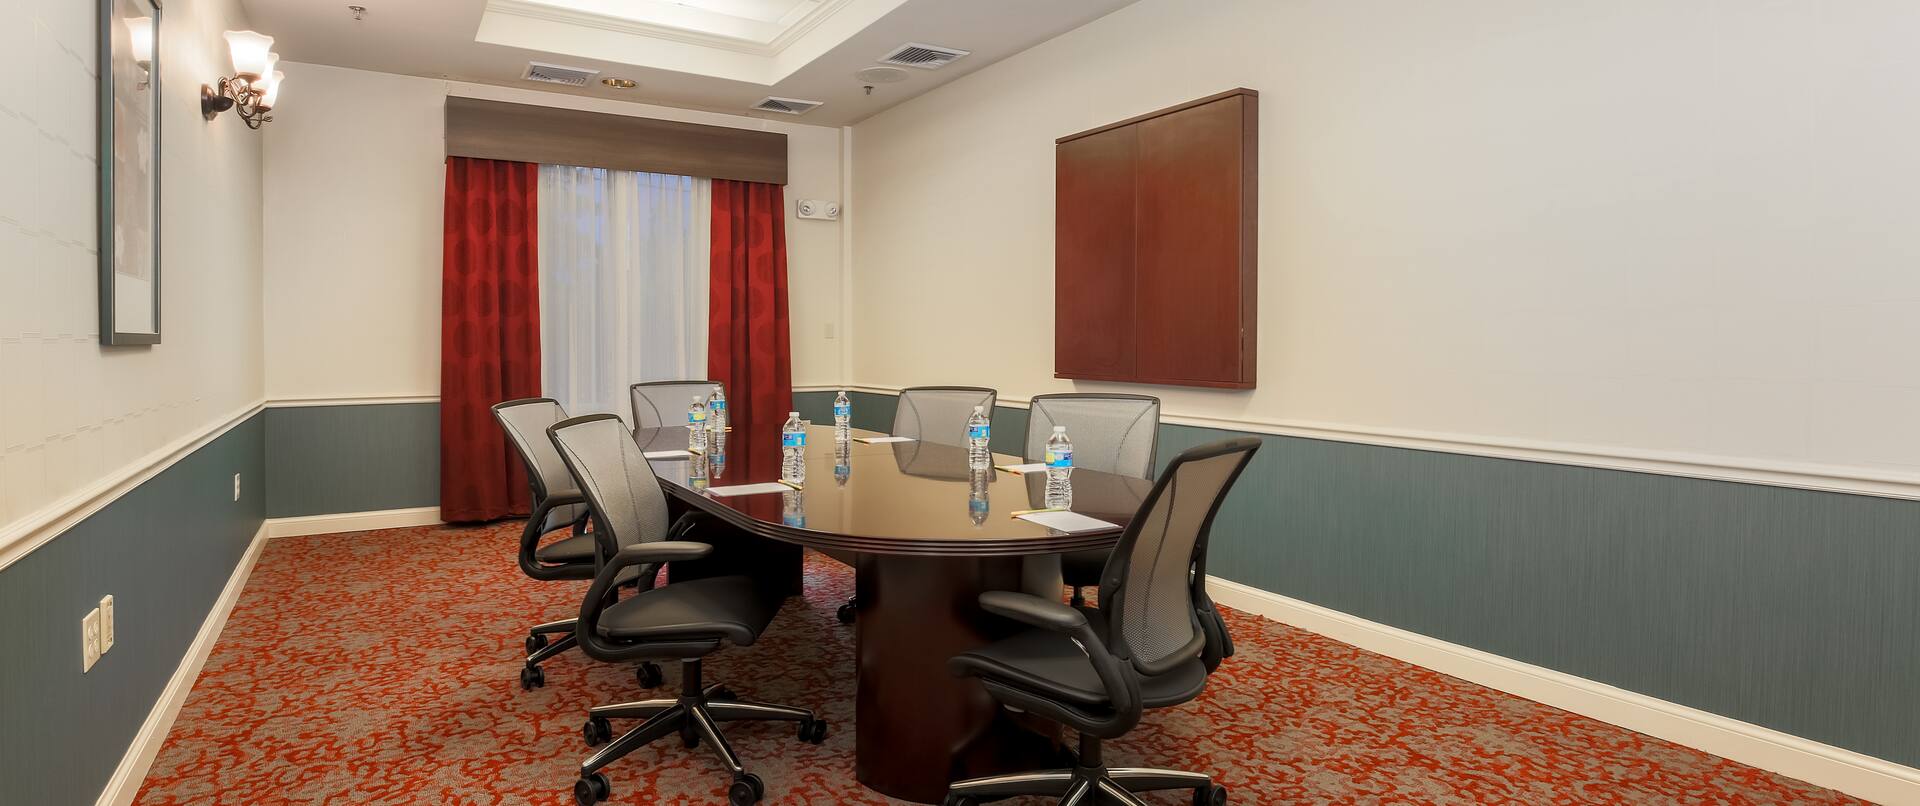 Nanuet Boardroom With Seating for Six Around Oval Table, Window, WallArt, and Media Cabinet